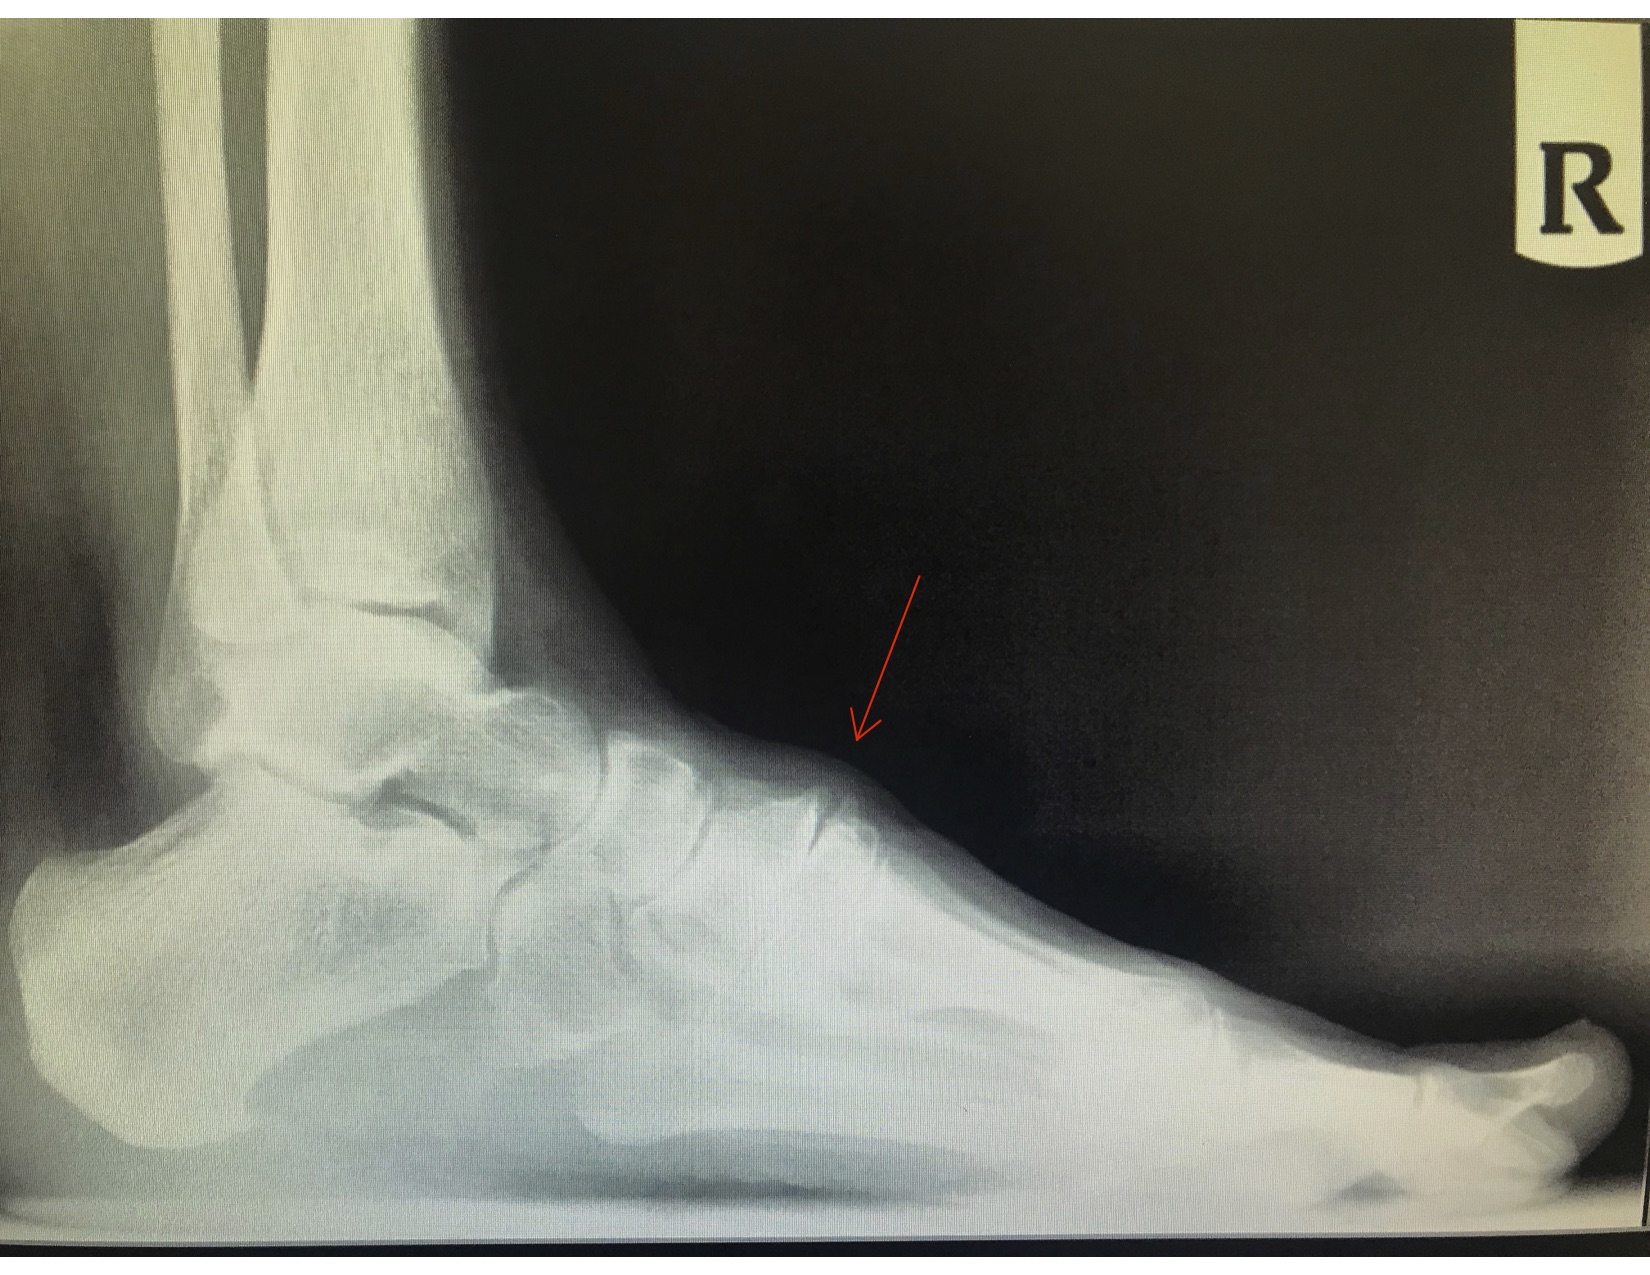 Anterior Tarsal Tunnel Syndrome- Note the dorsal soft tissue swelling and dorsal osteophyte from the metatarsal-cuneiform joint causing distal paresthesias due to medical dorsal cutaneous nerve entrapment